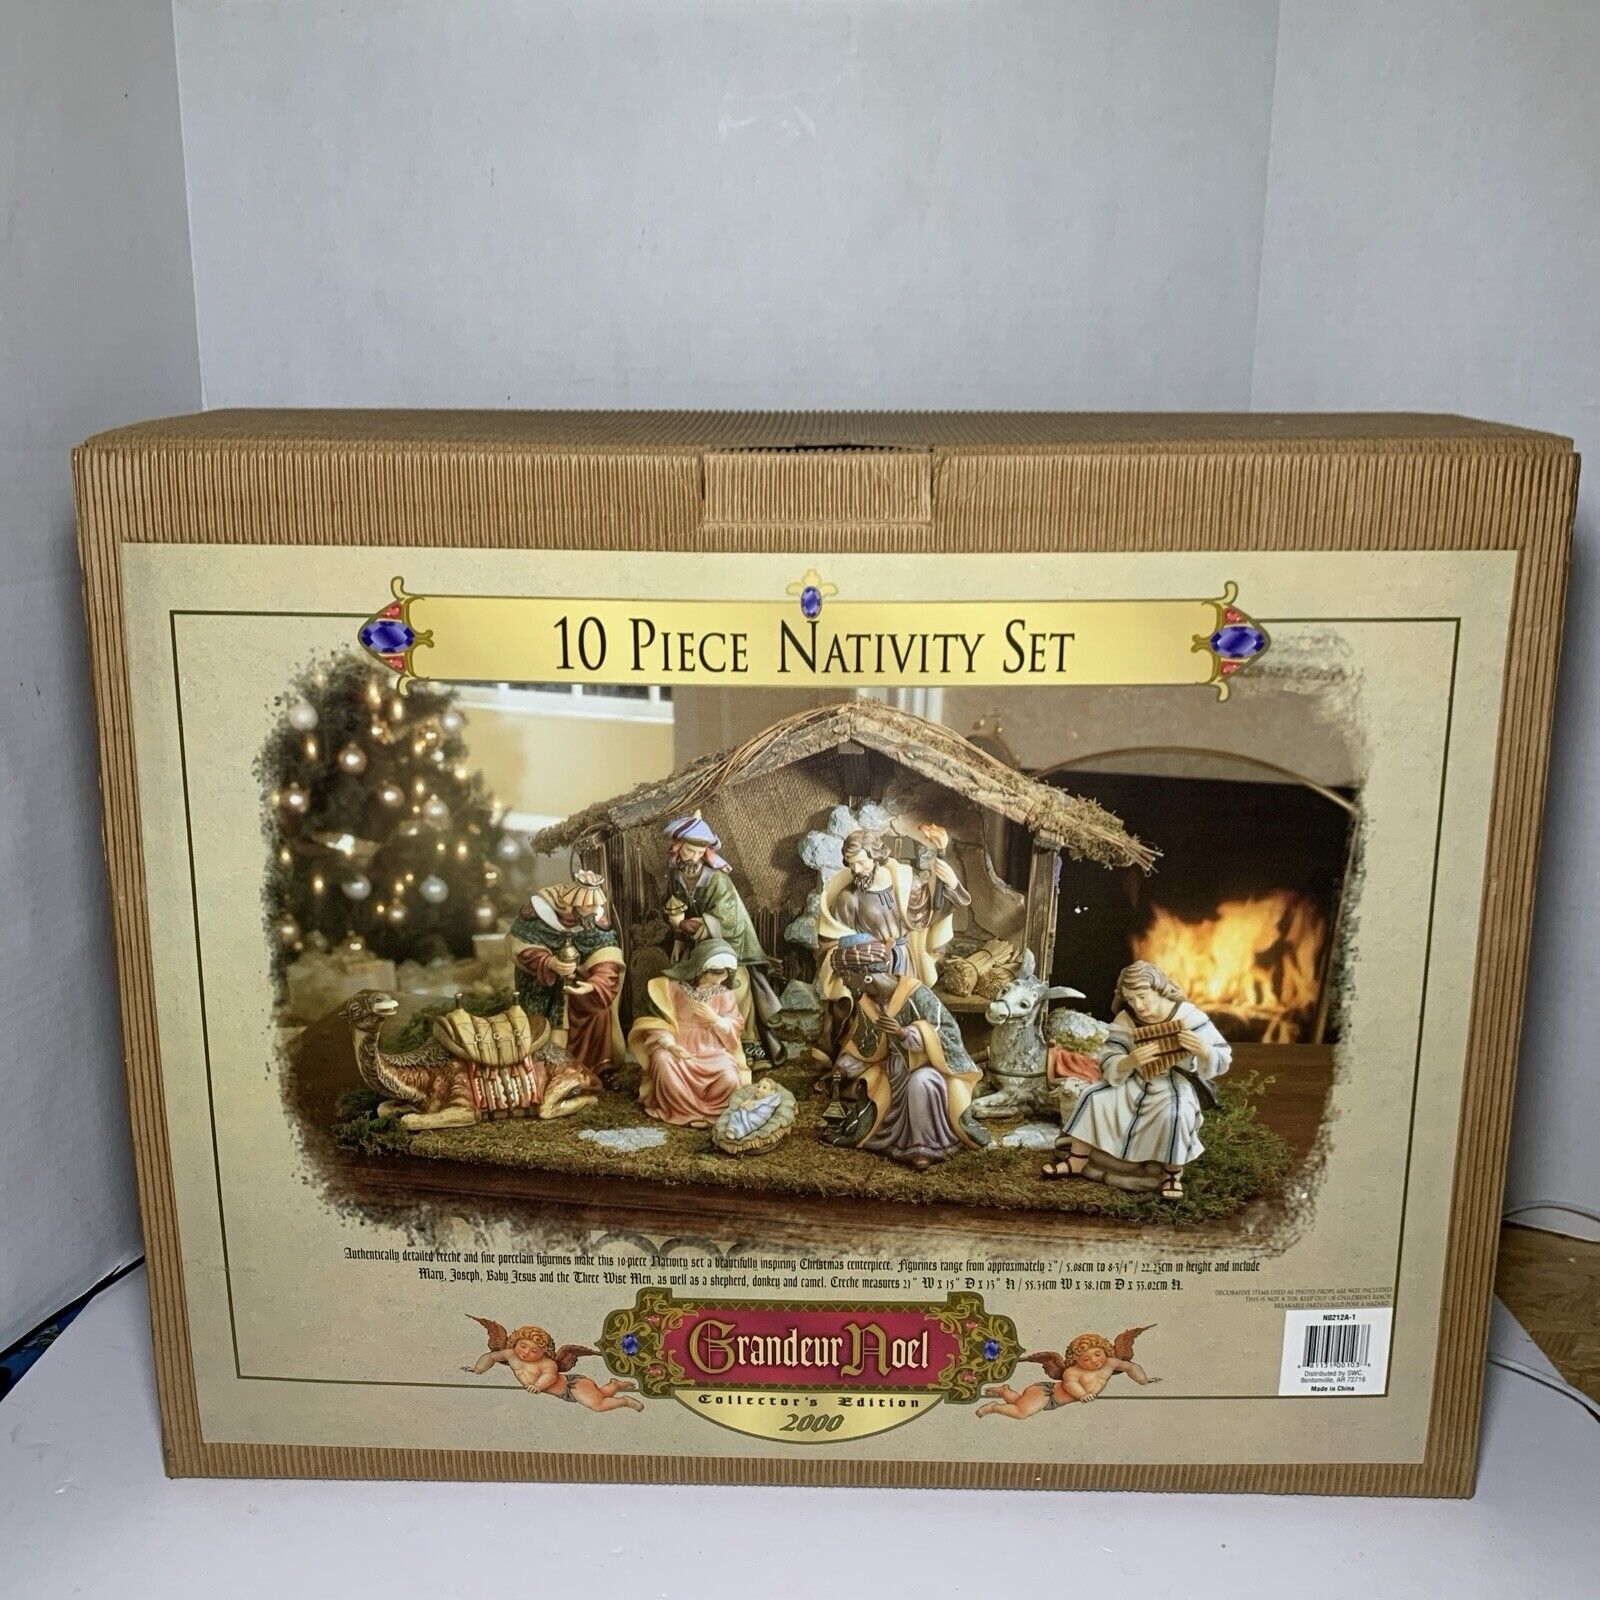 Granduer Noel 2000 Collectors Edition Large 10 Piece Hand Painted Nativity Set